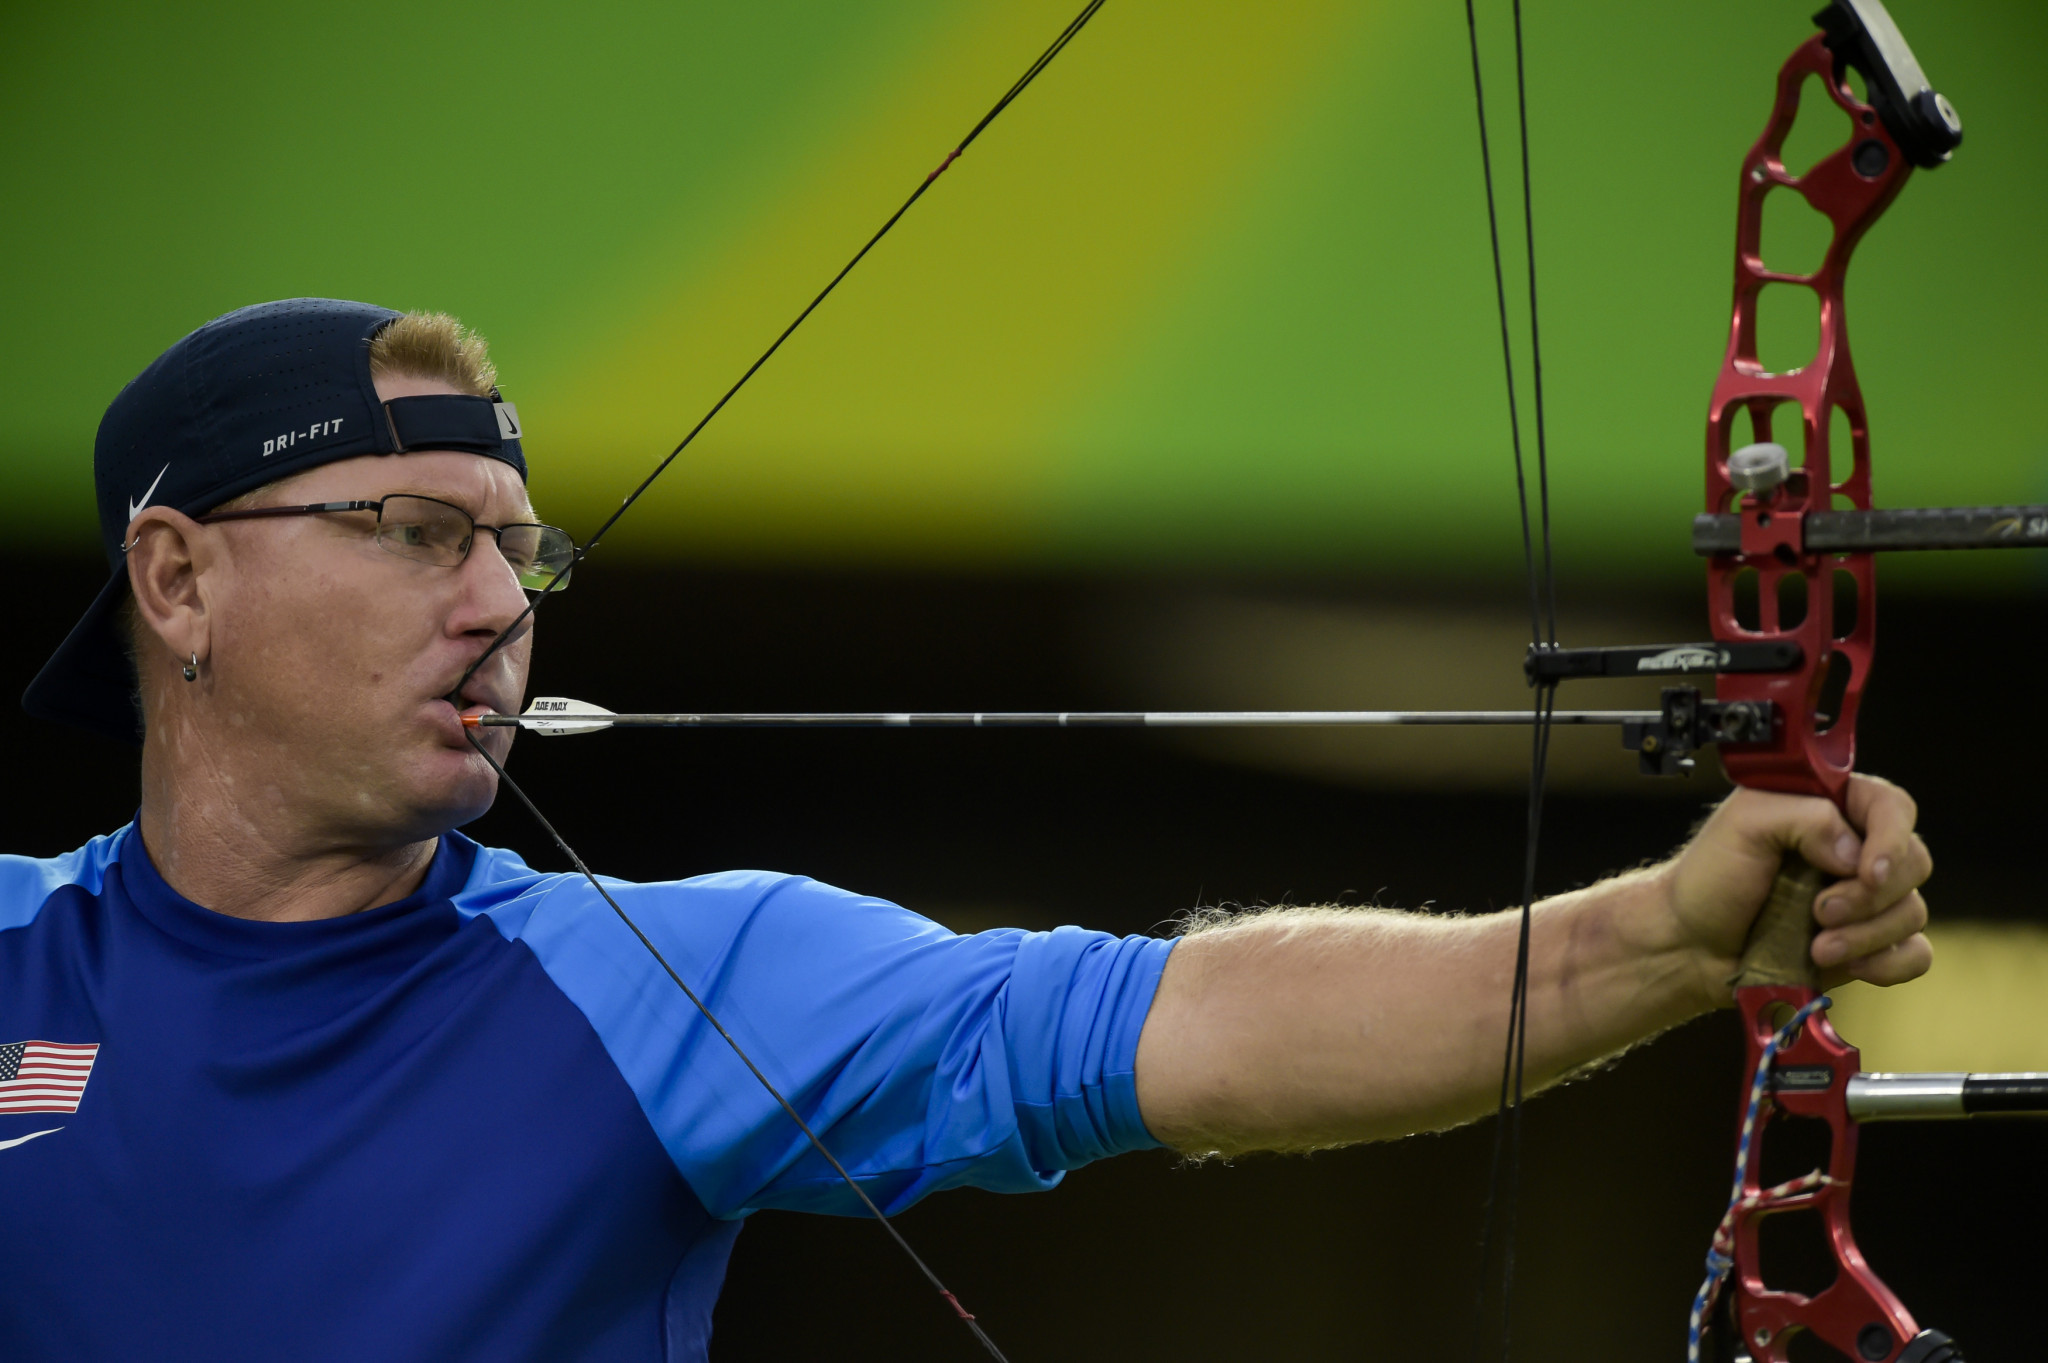 George Ryals will lead the Paralympic archery team towards Tokyo 2020 ©Getty Images